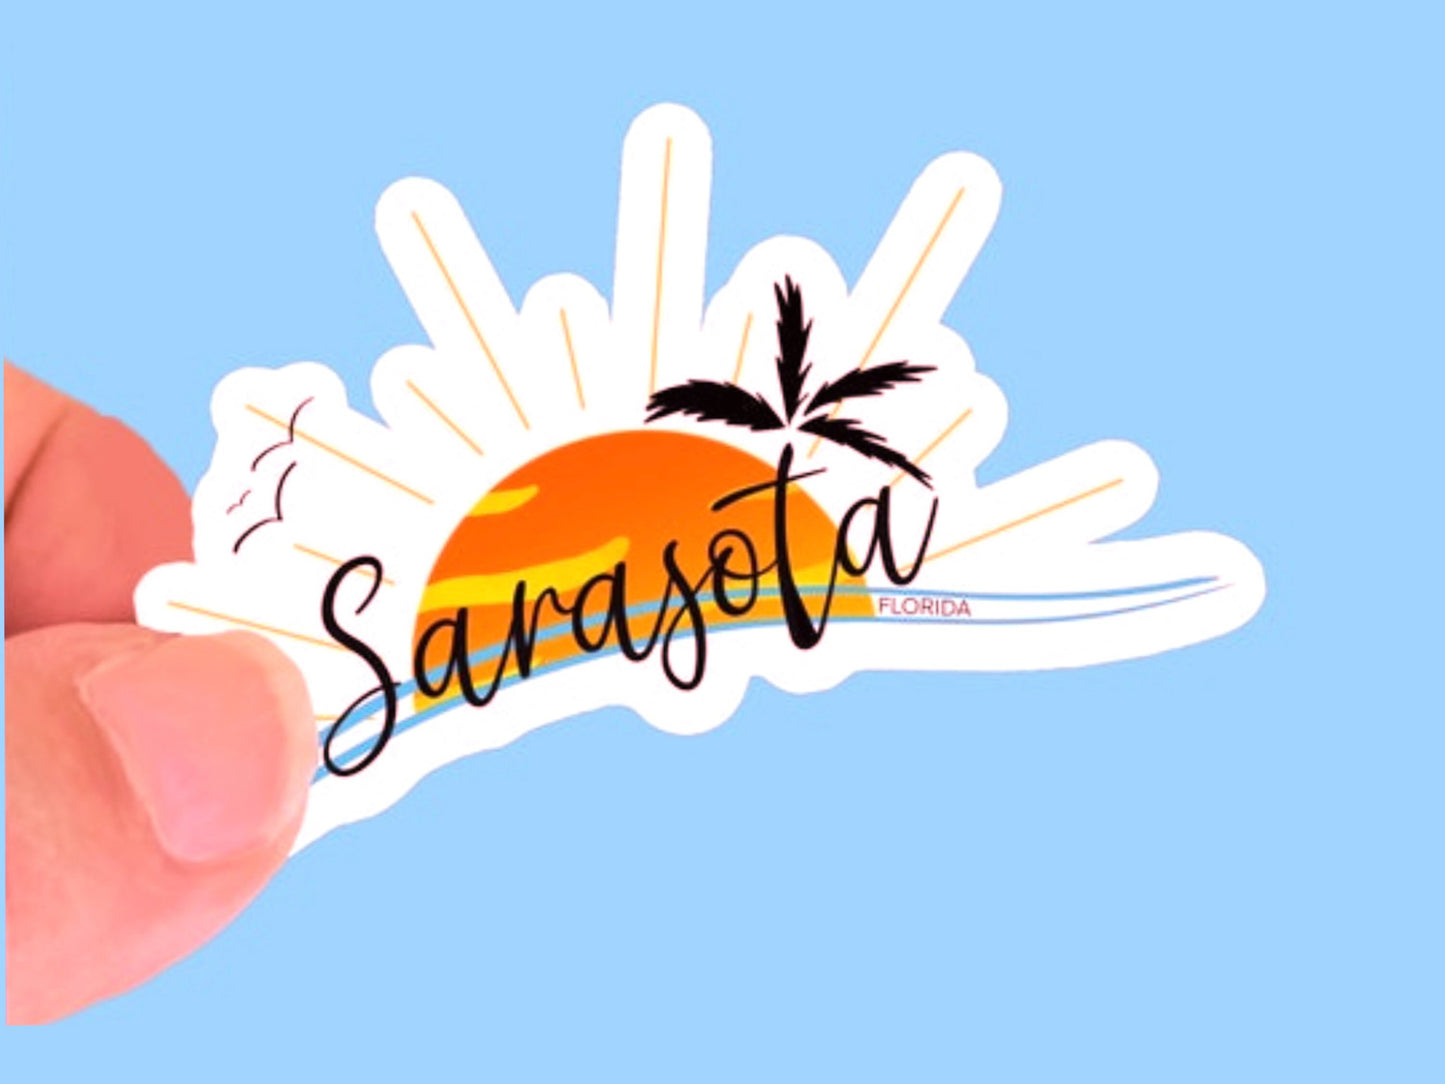 Sarasota Sunset Sticker, 2.5 inch Vinyl Waterproof Sticker, Use for water bottles, laptops, luggage, candle jars and more